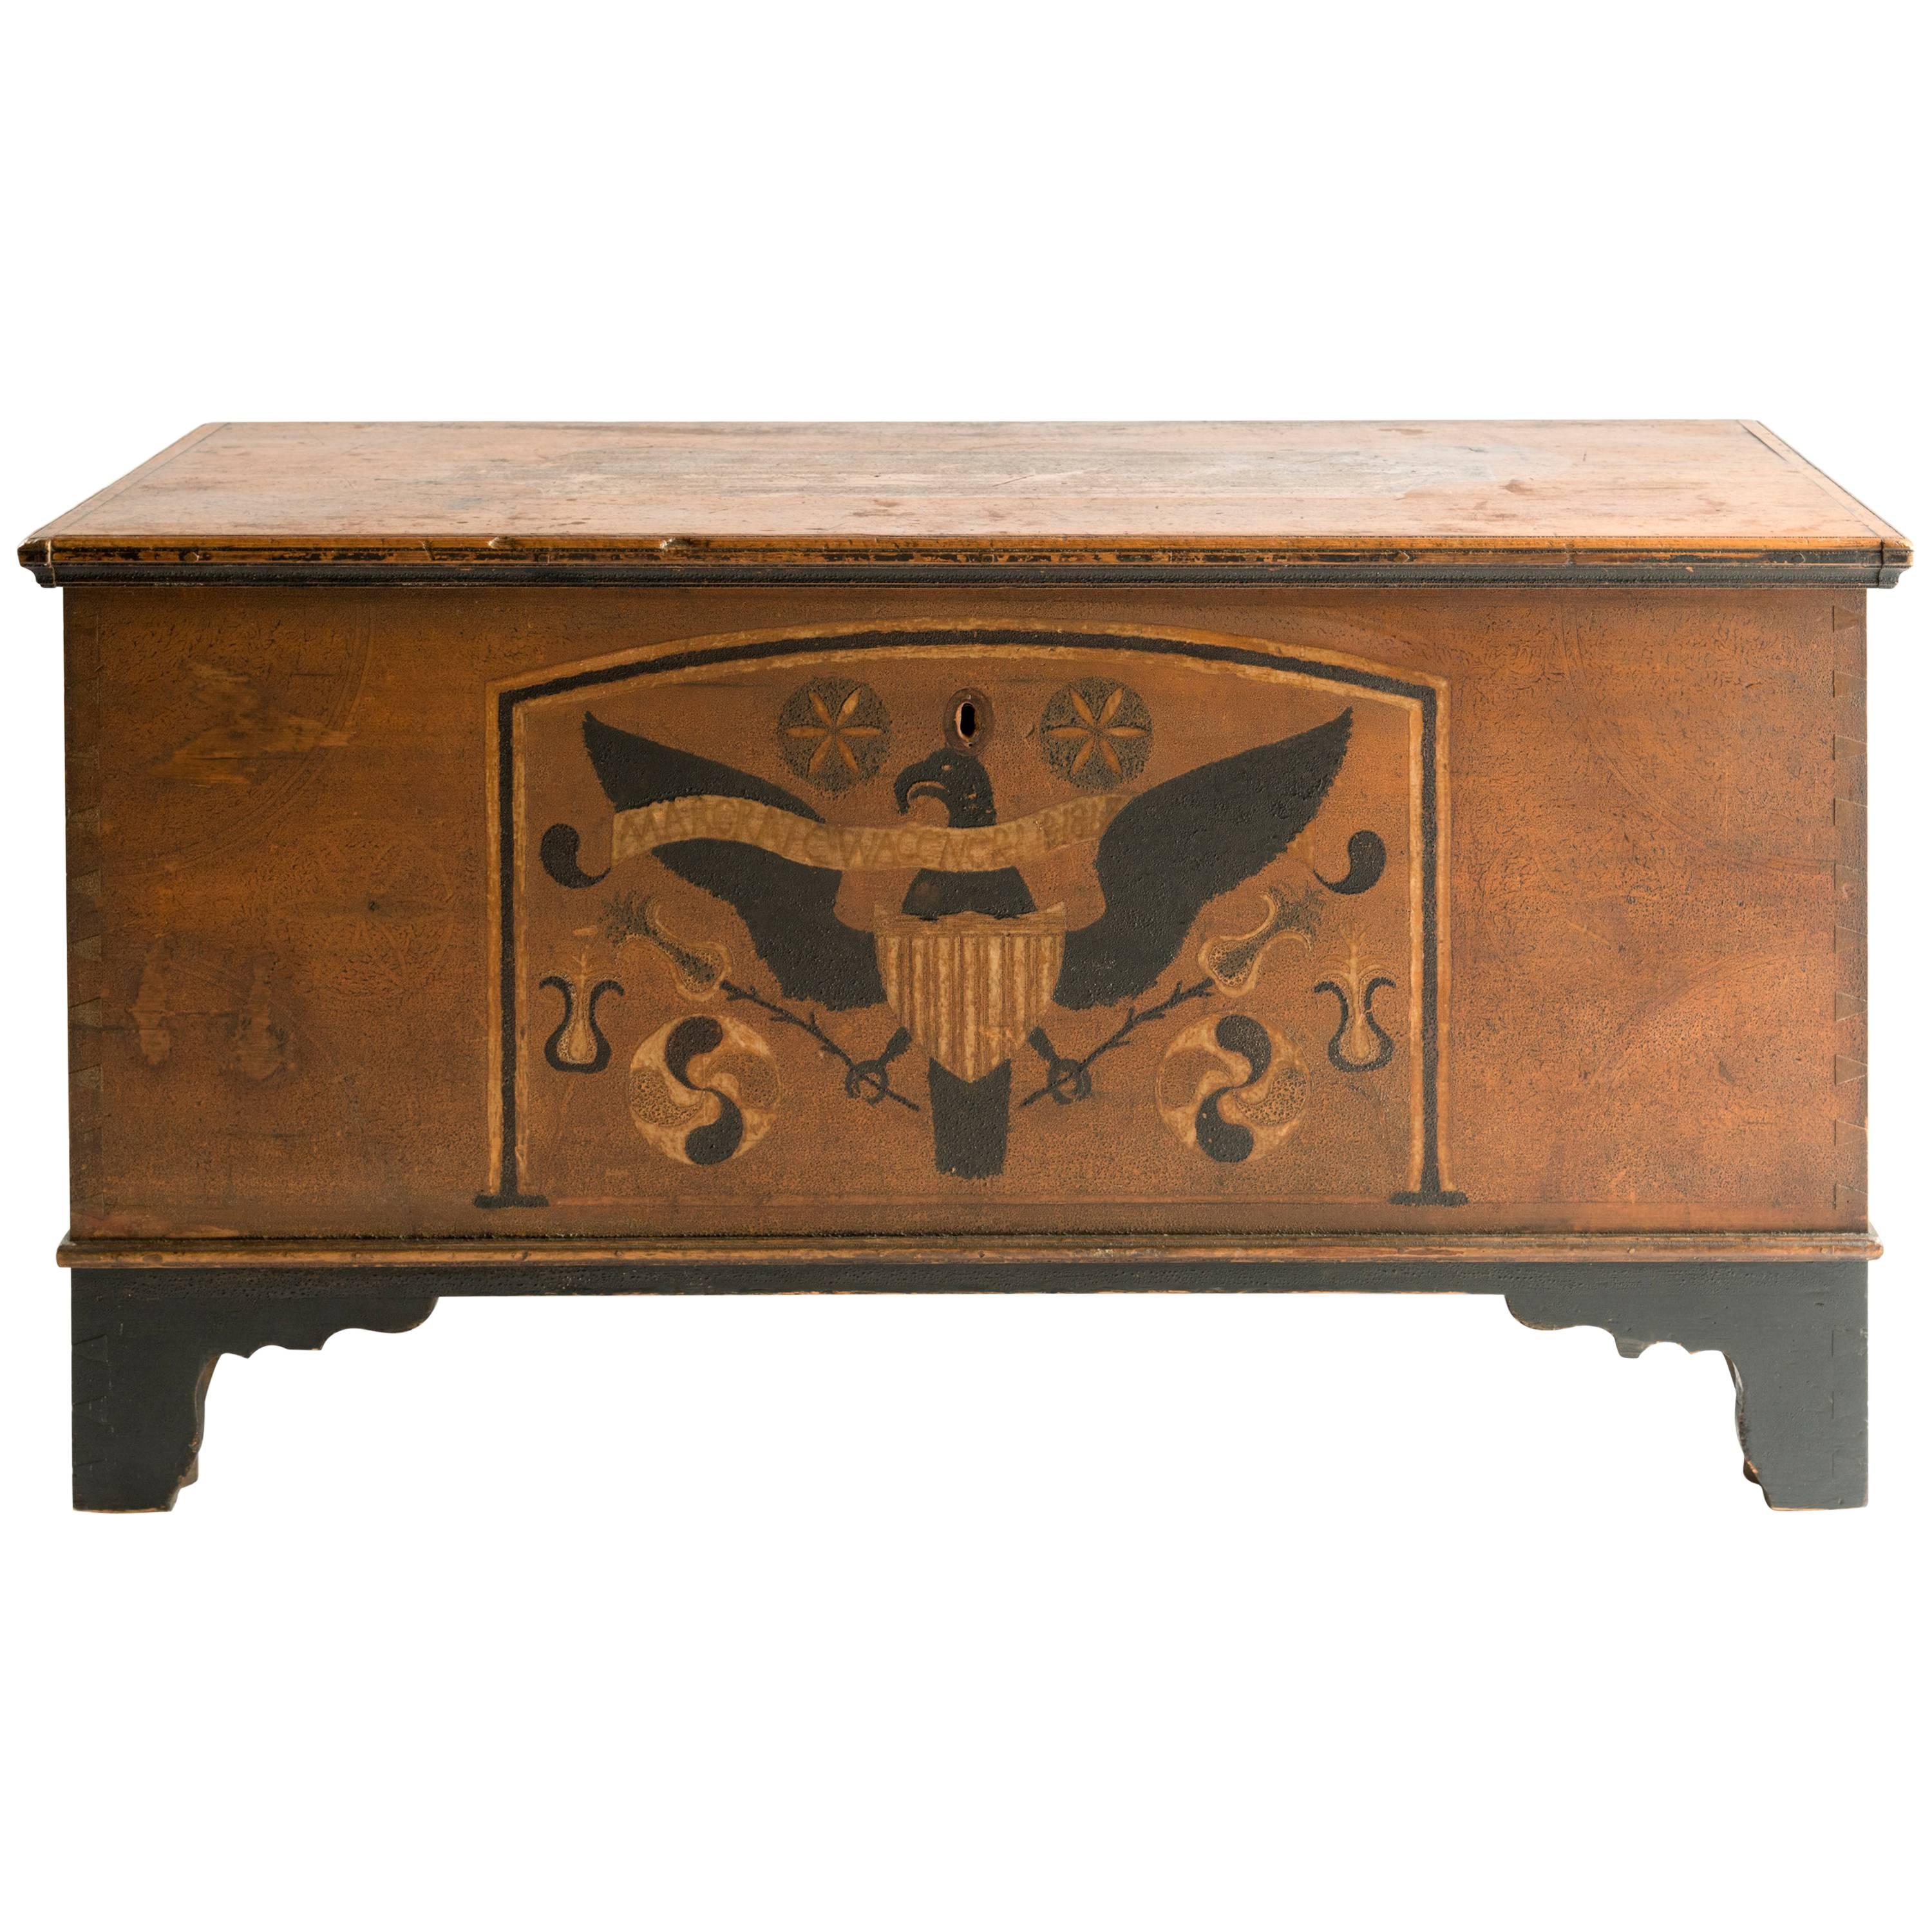 Pennsylvania Polychrome and Eagle Decorated Pine Blanket Chest For Sale